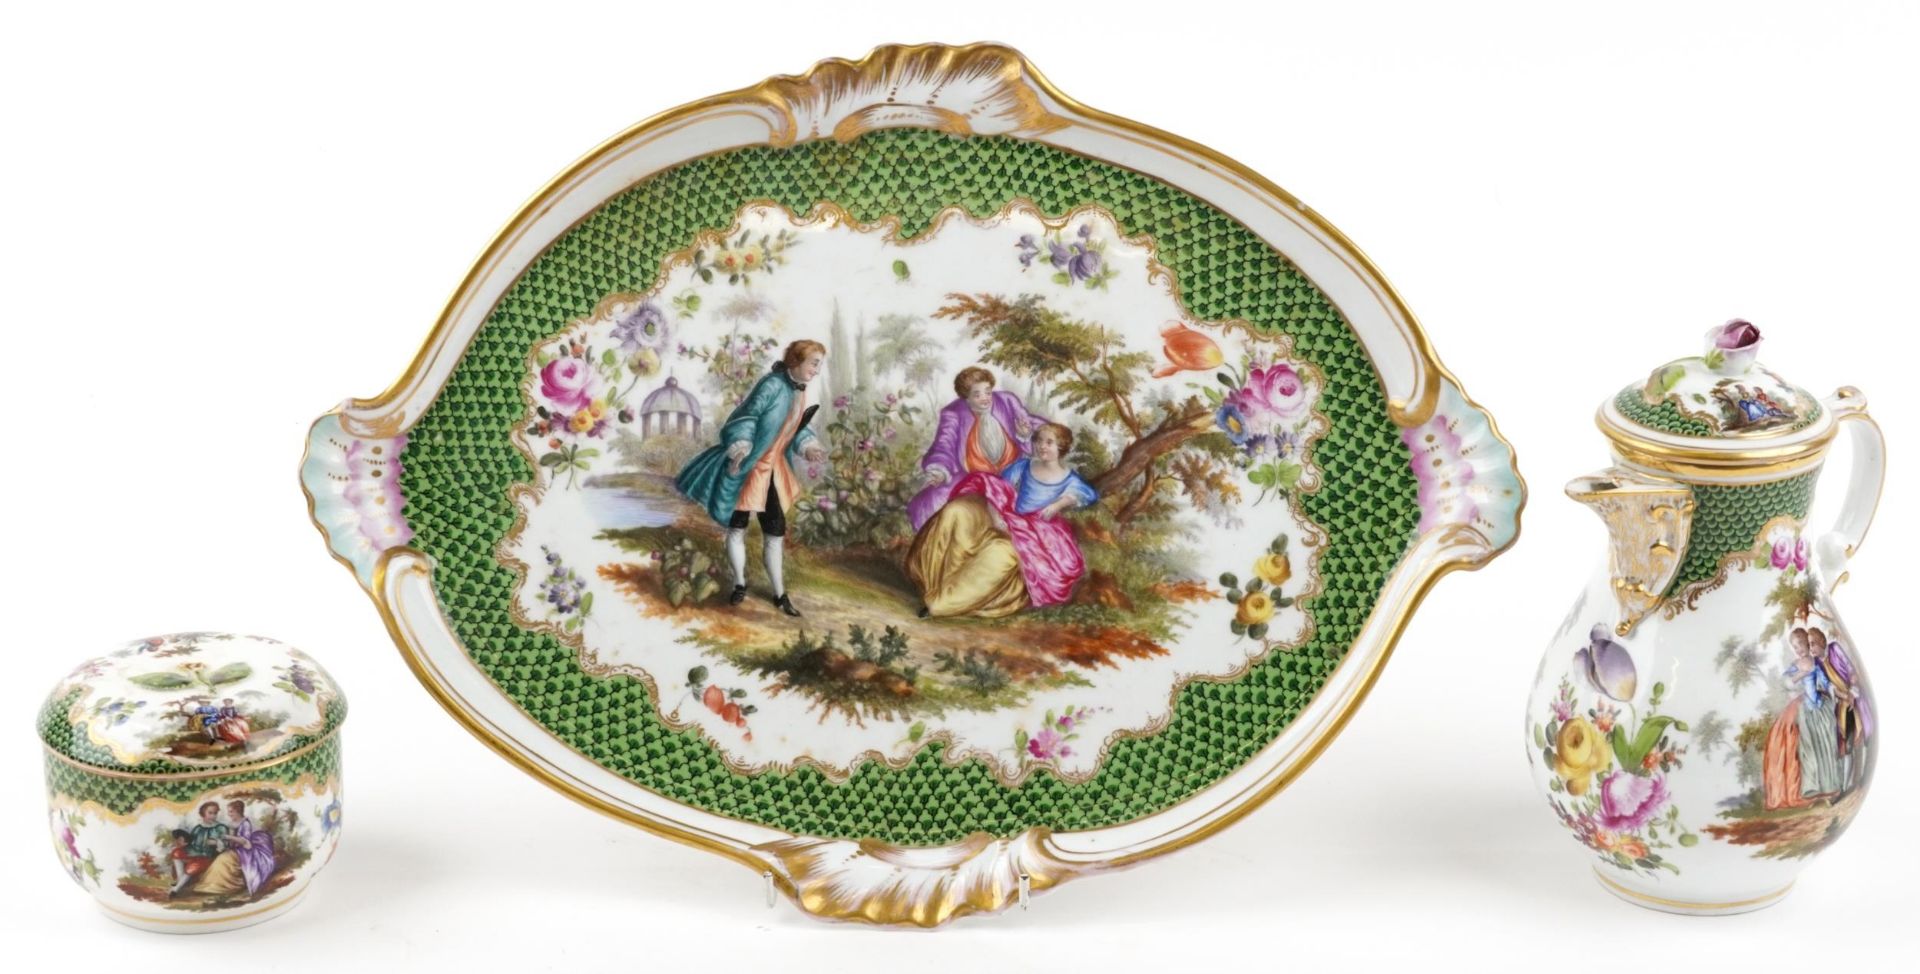 Carl Thieme, 19th century German Potschappel porcelain oval cabaret tray with coffee pot and